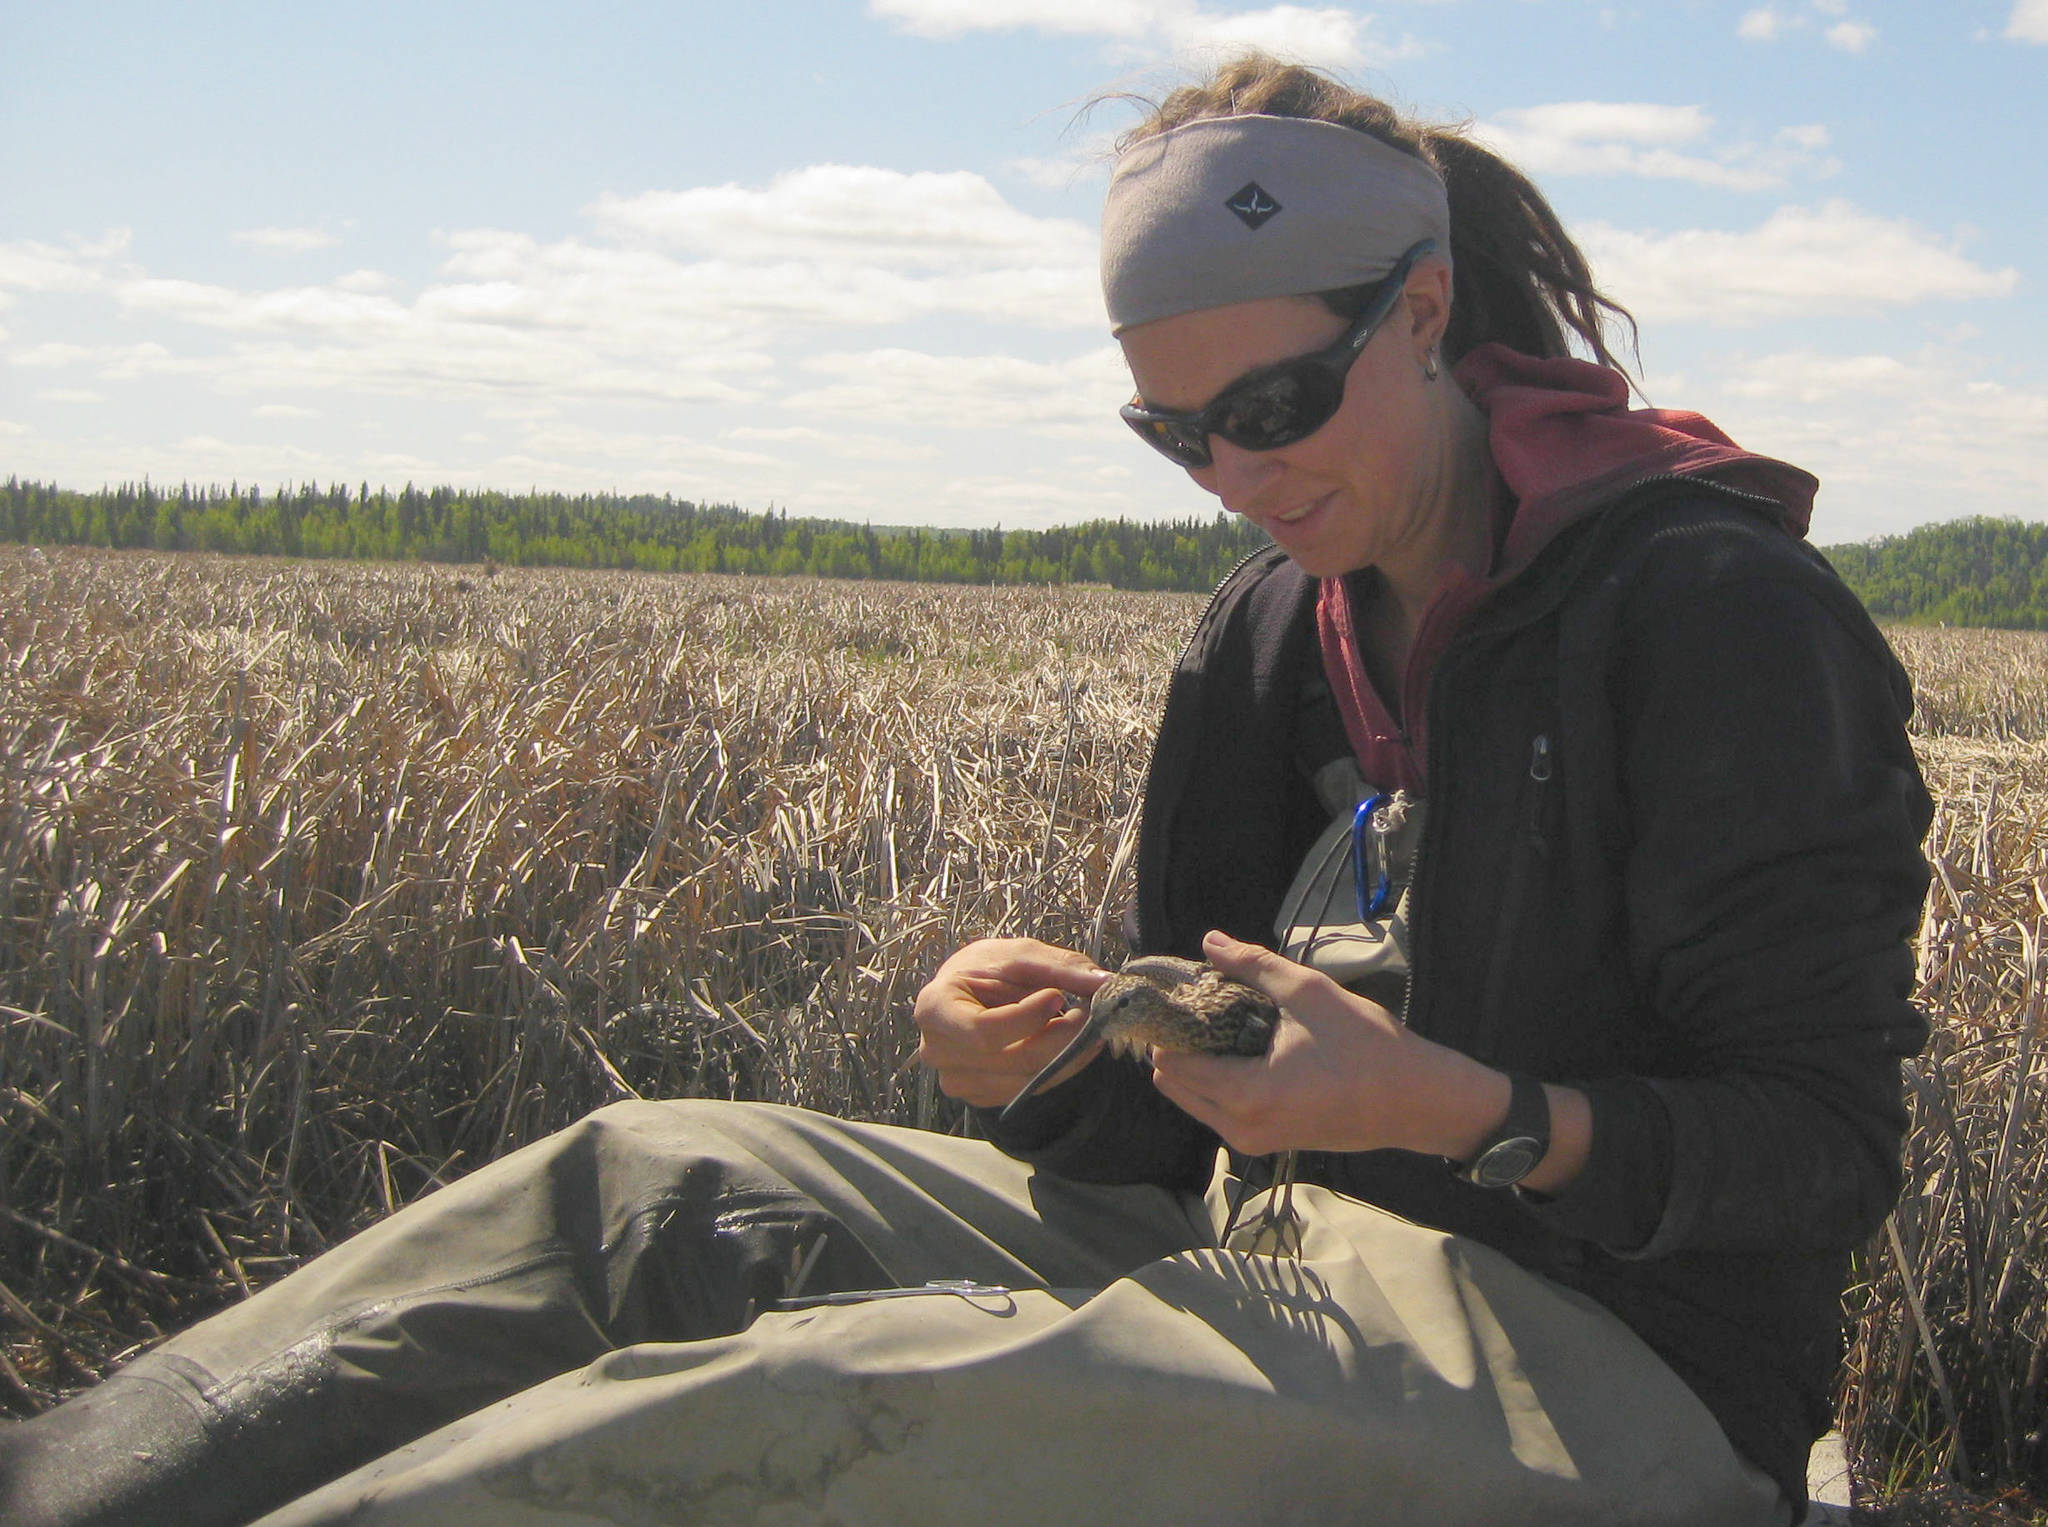 Sadie Ulman studied how shorebirds used Chickaloon Flats in 2009-10 as a graduate student at the University of Delaware. She now works for the Alaska SeaLife Center in Seward. (Photo courtesy of Sean Ulman)